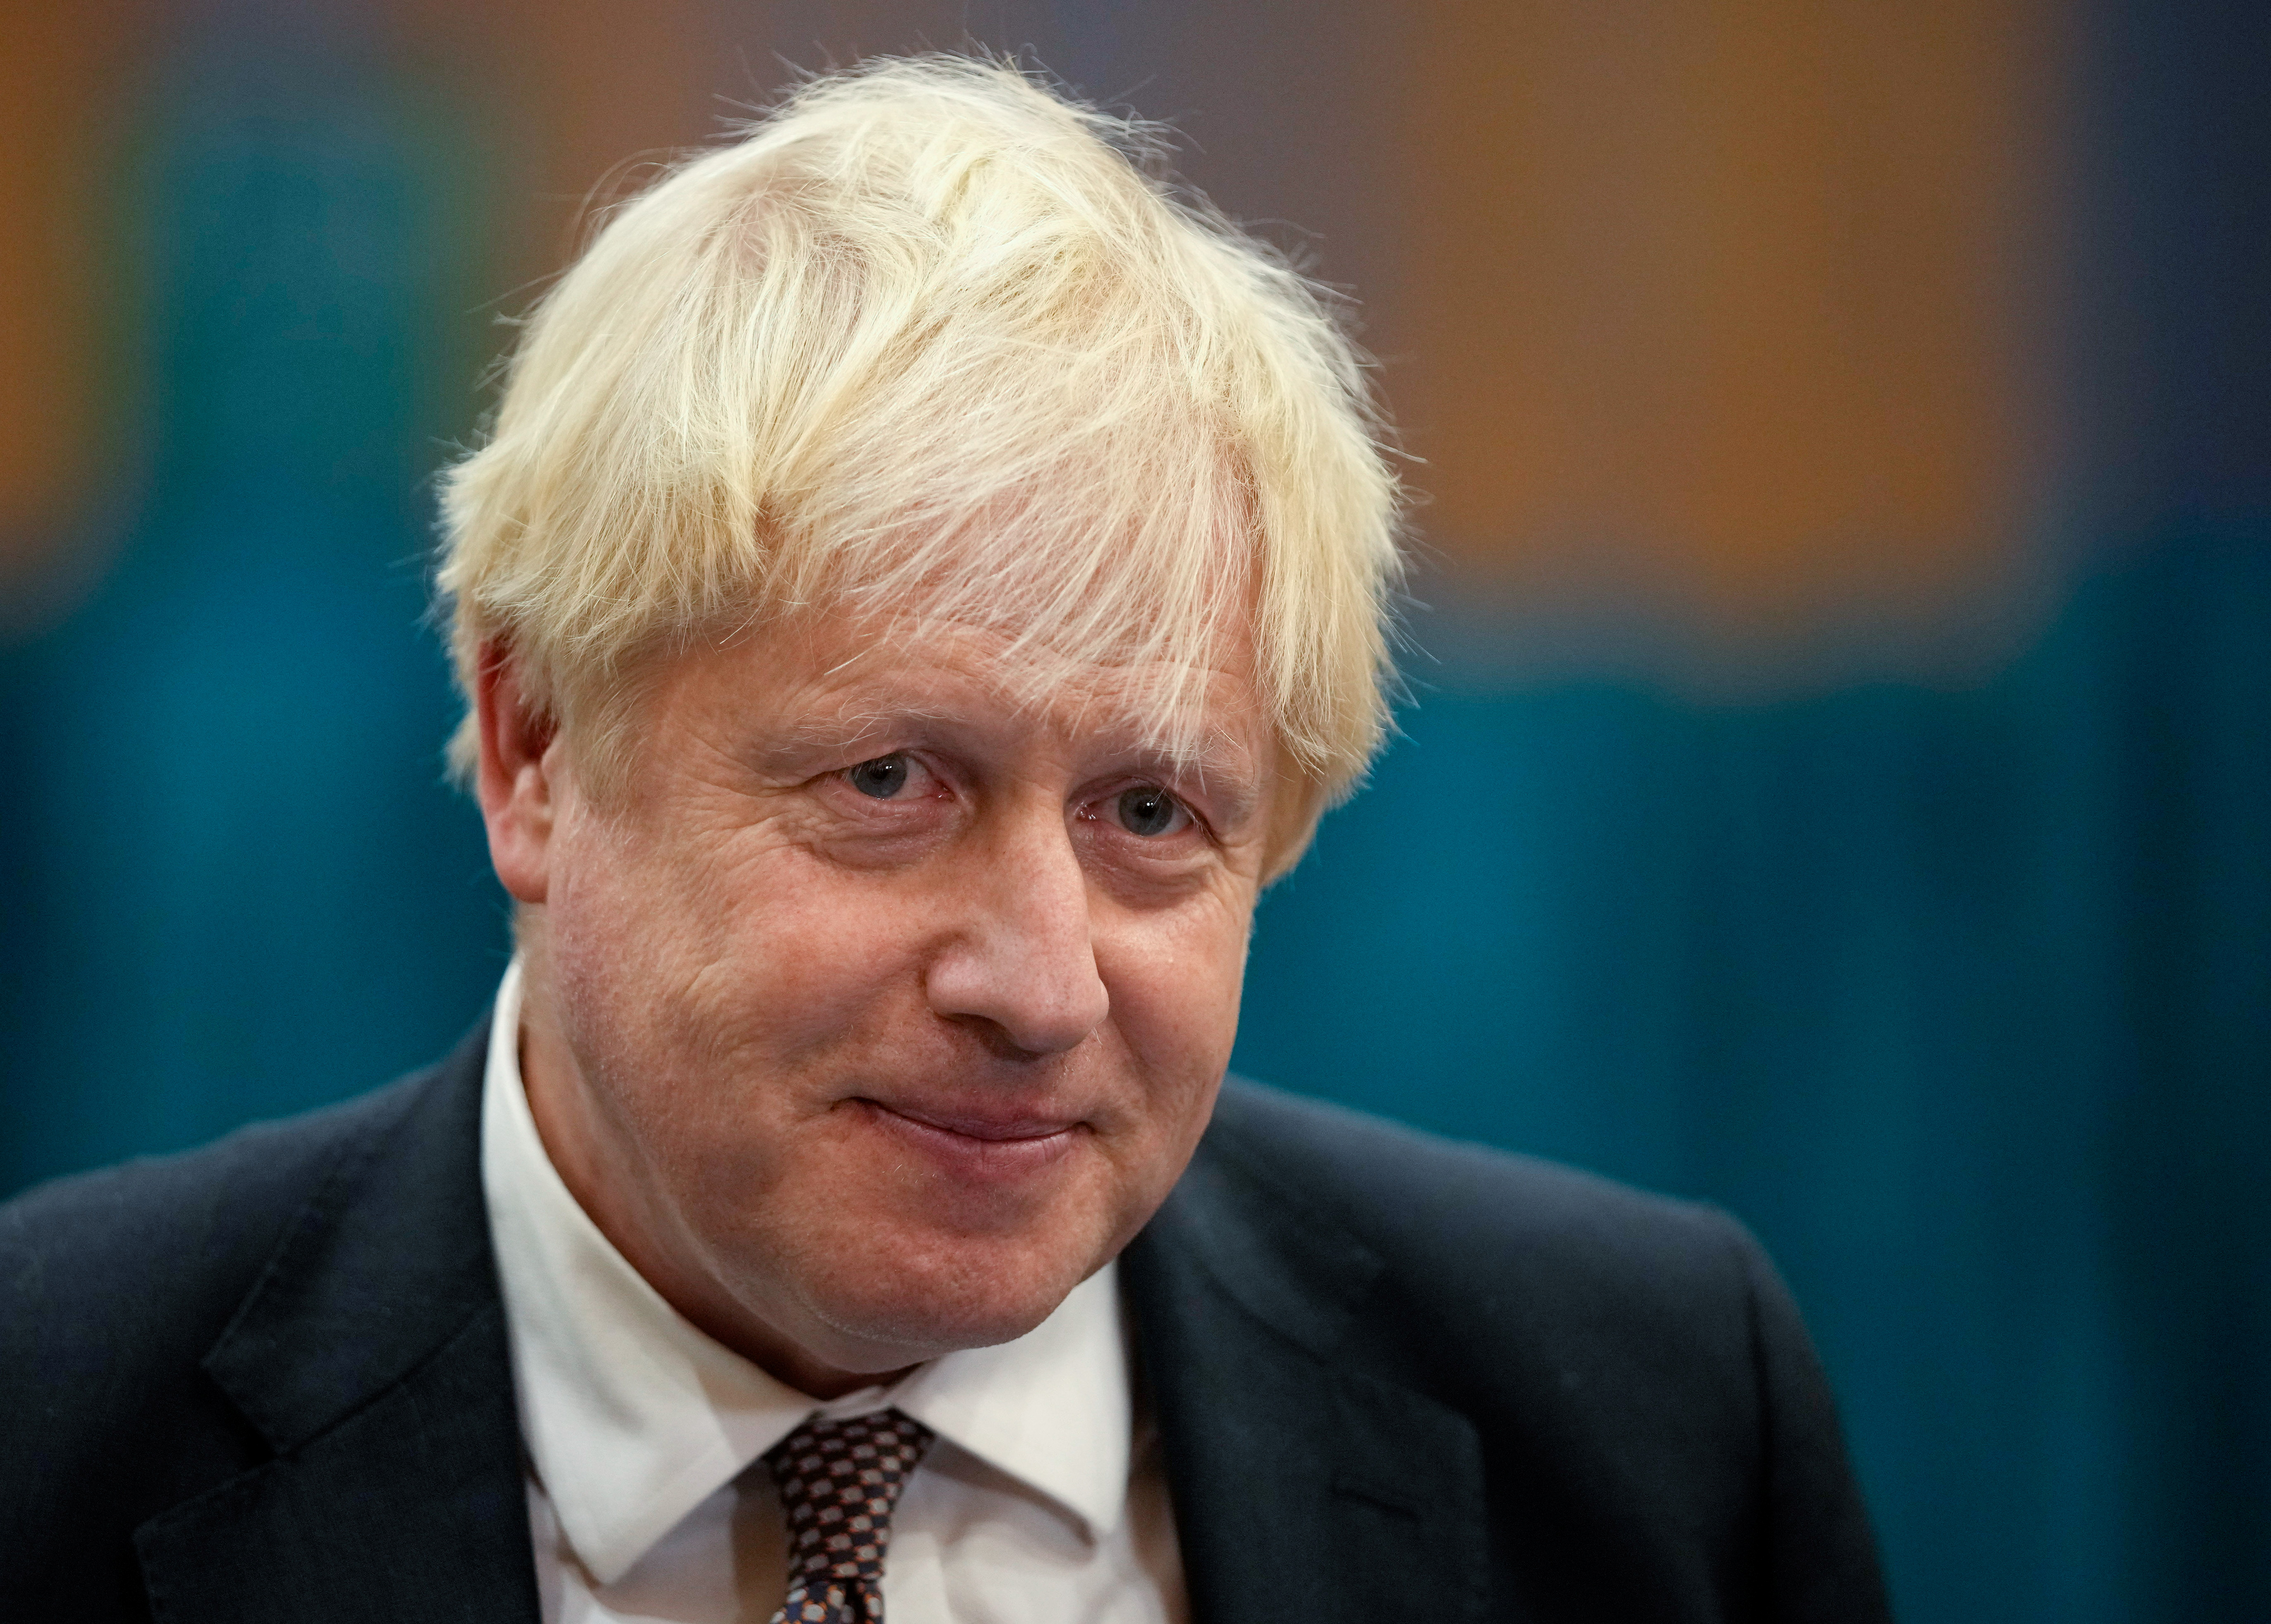 Britain's Prime Minister Boris Johnson speaks to the media as he visits at a COVID-19 vaccination centre at Little Venice Sports Centre, in London, Britain October 22, 2021.  Matt Dunham/Pool via REUTERS